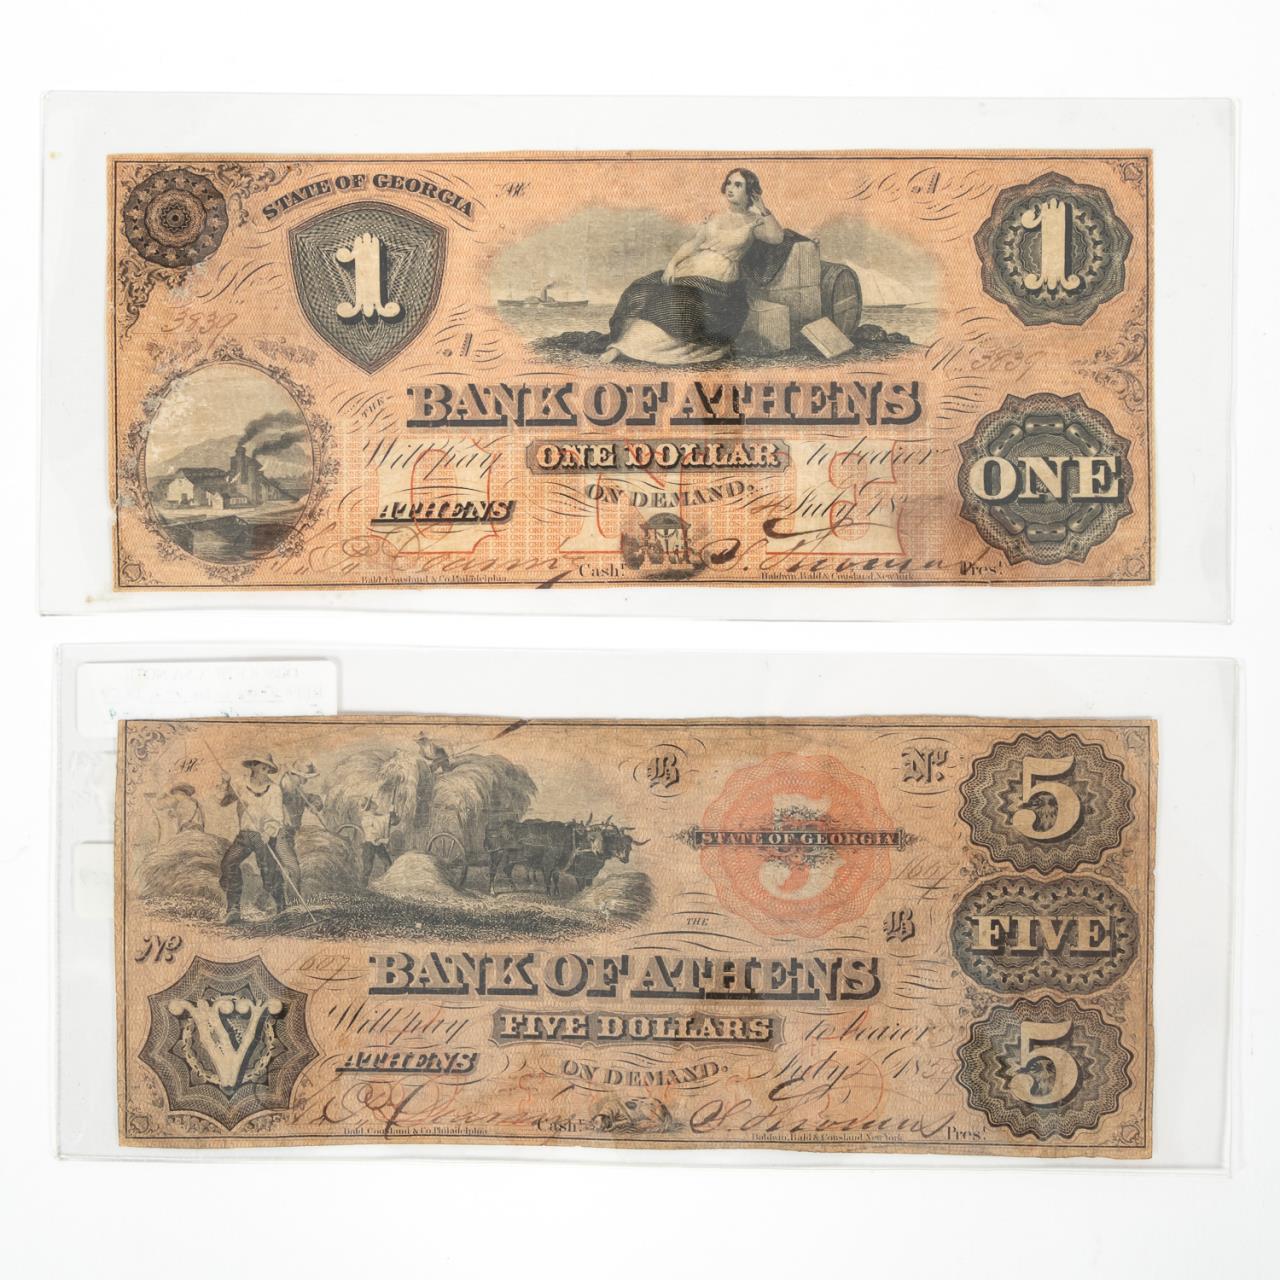  BANK OF ATHENS OBSOLETE NOTES  35e1f0